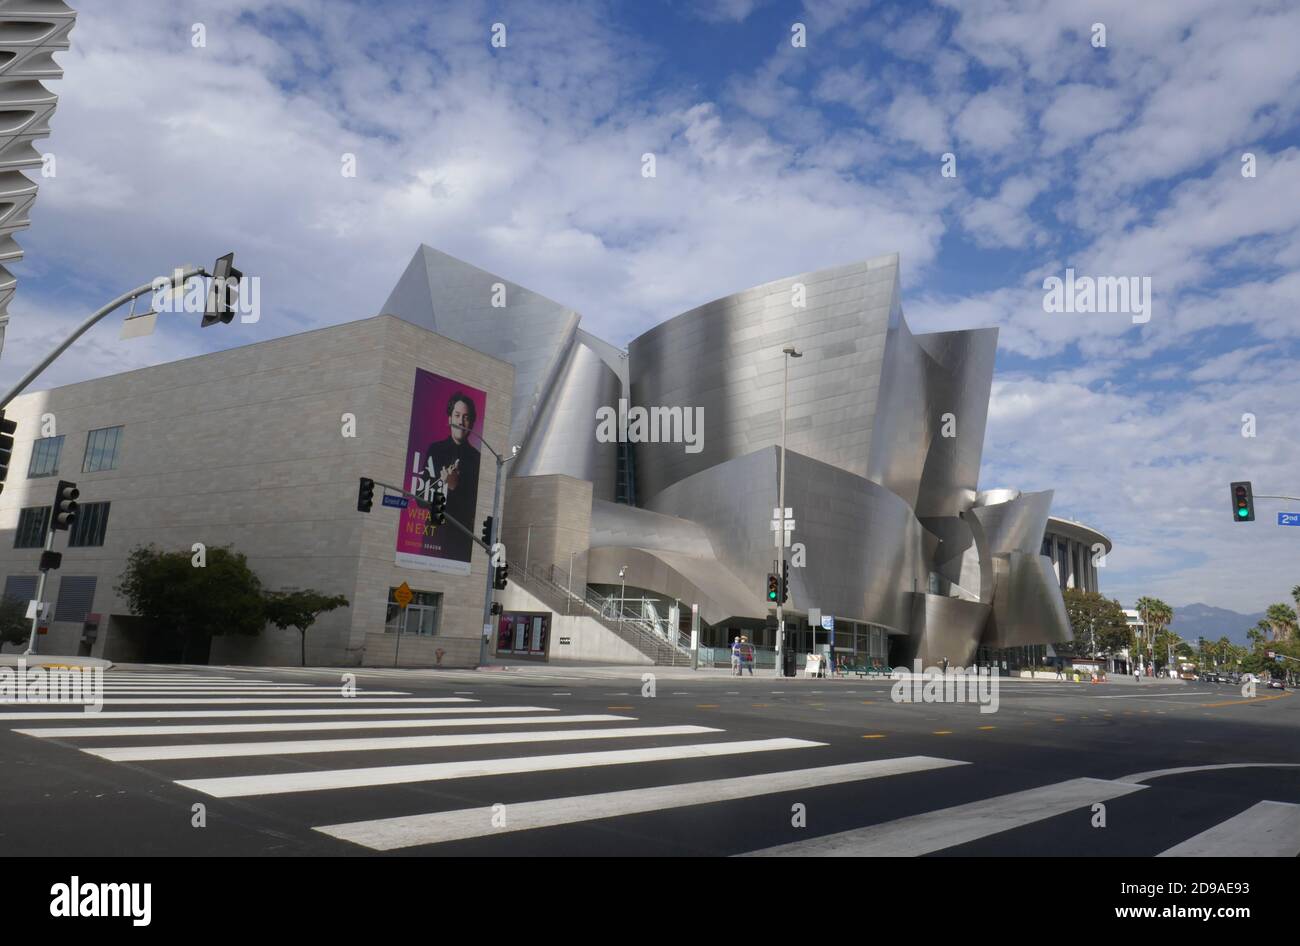 Los Angeles, California, USA 1st November 2020 A general view of atmosphere of Disney Concert Hall, where Iron Man, Entourage, Glee, Get Smart, NCIS Los Angeles, The Soloist, Melrose Place, Alvin and the CHipmunks, Her and Stand Up To Cancer have filmed at 111 S. Grand Avenue on November 1, 2020 in Los Angeles, California, USA. Photo by Barry King/Alamy Stock Photo Stock Photo